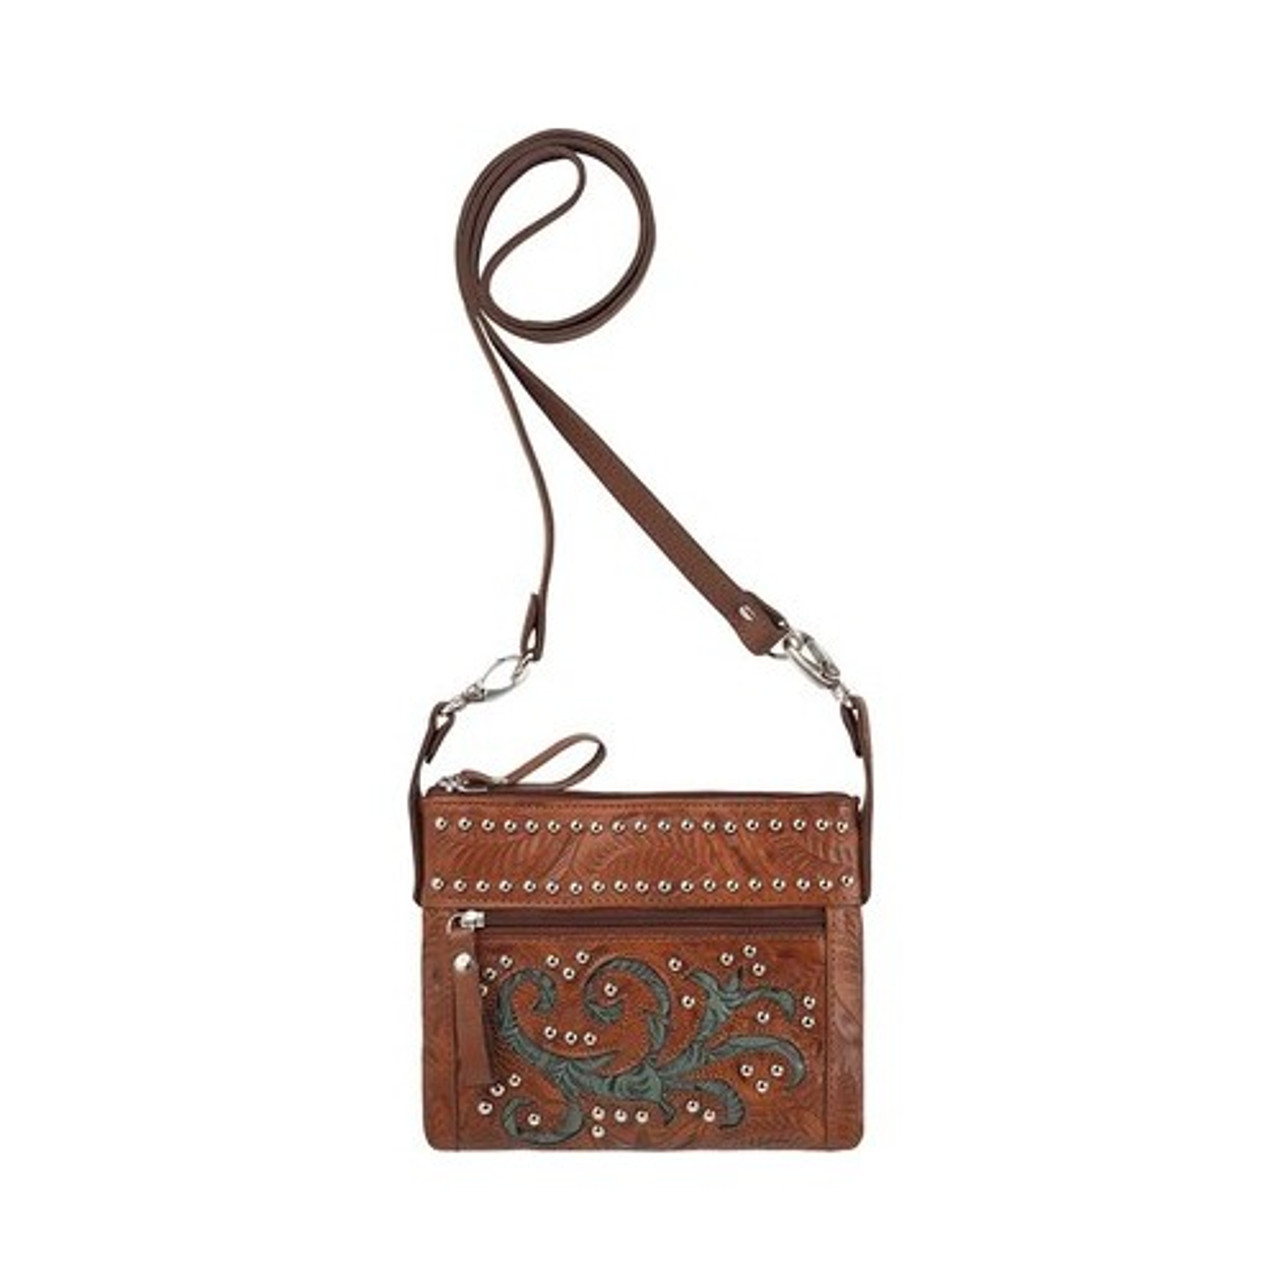 American West Texas Two Step Small Crossbody Bag/Wallet - Chocolate / Pony Hair